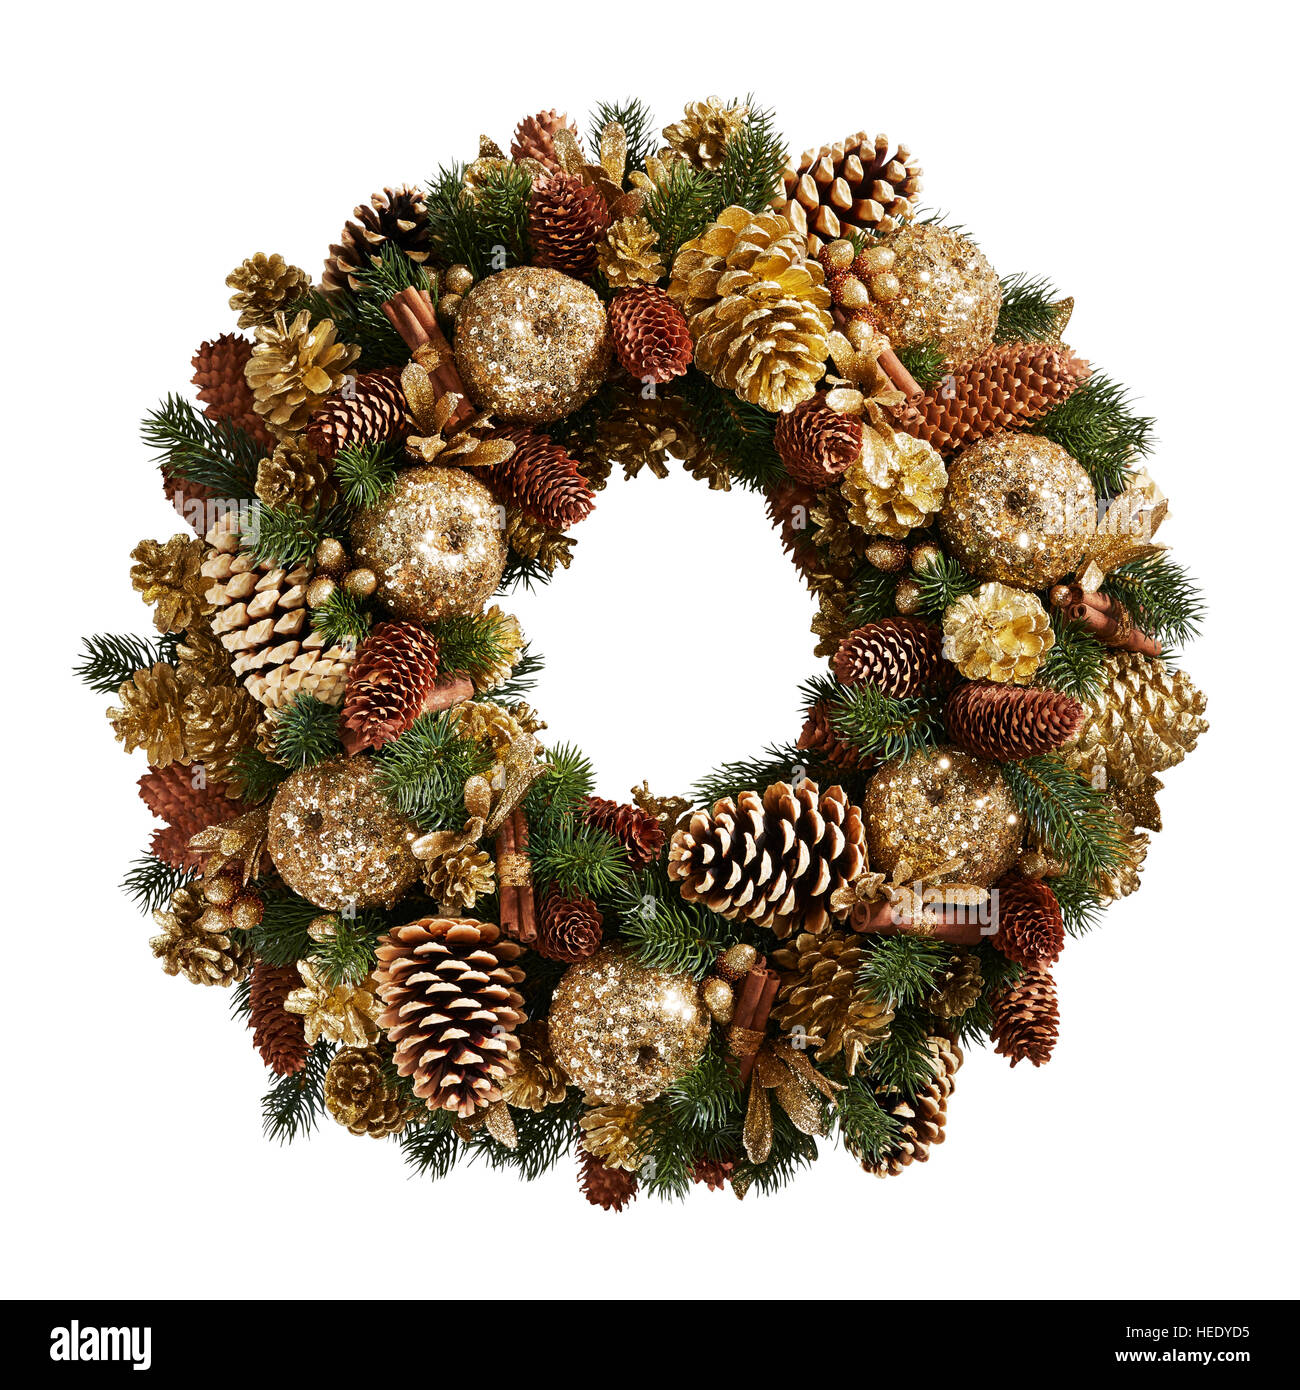 Christmas wreath decoration cut out festive door stylish traditional circular round traditional festive Stock Photo